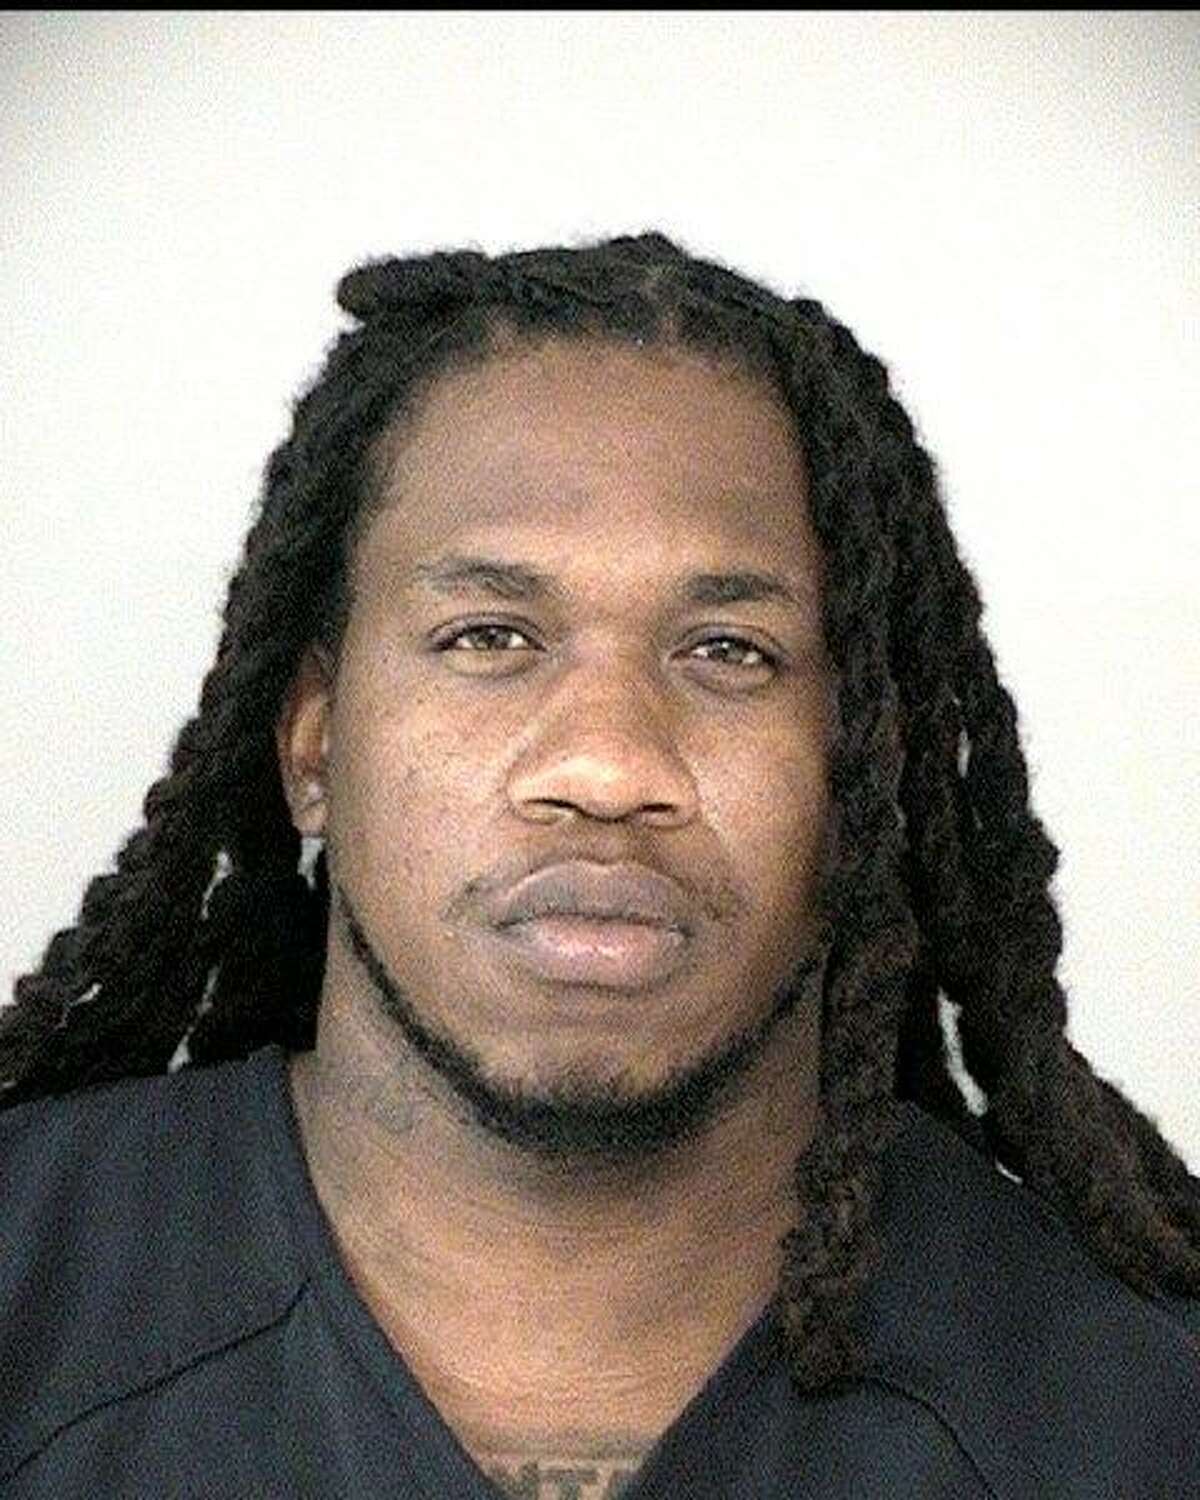 Houston-resident James Curtis Hamilton, 28, was arrested Saturday in connection with the shooting death of Fort Bend ISD Travis High School teacher and coach Derwyn Laudersale at Seabourne Creek Sports Complex in Rosenberg. Hamilton is currently being held at the Fort Bend County Jail on murder charges without bond.